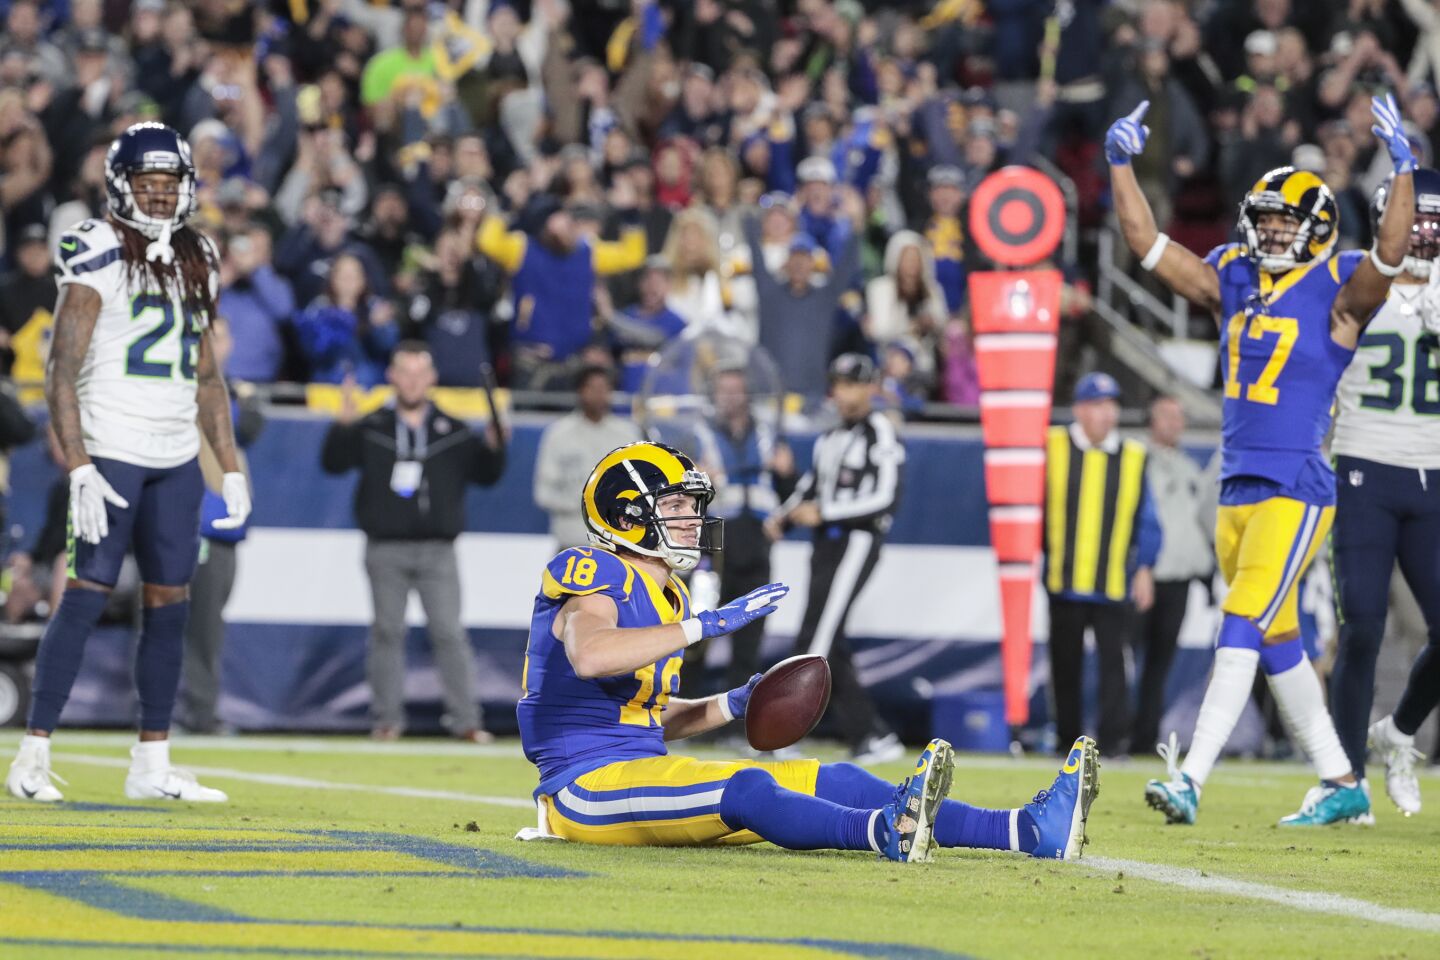 Rams wide receiver Cooper Kupp sits in the end zone after catching a touchdown pass.